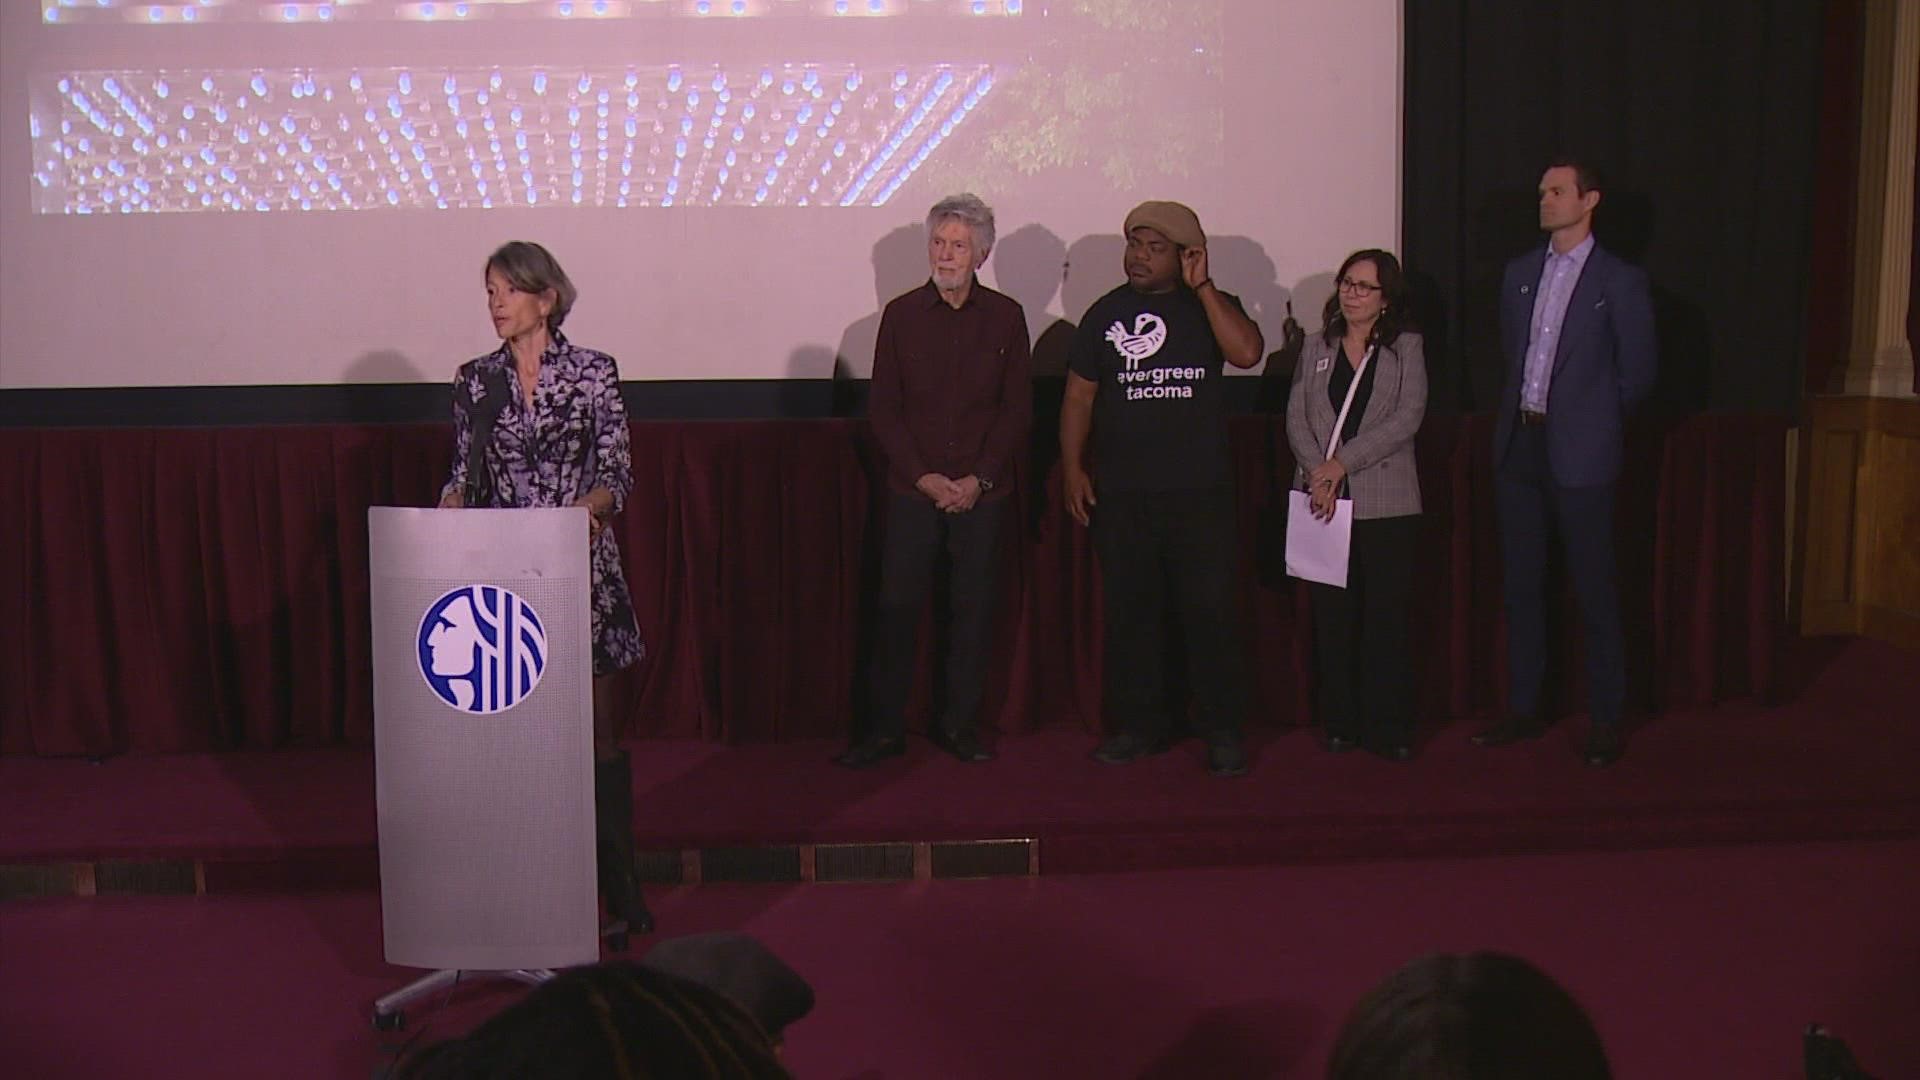 In a unanimous vote by Seattle City Council, there will now be an 11-member team that will advise on policy and programs to grow the city's film industry.